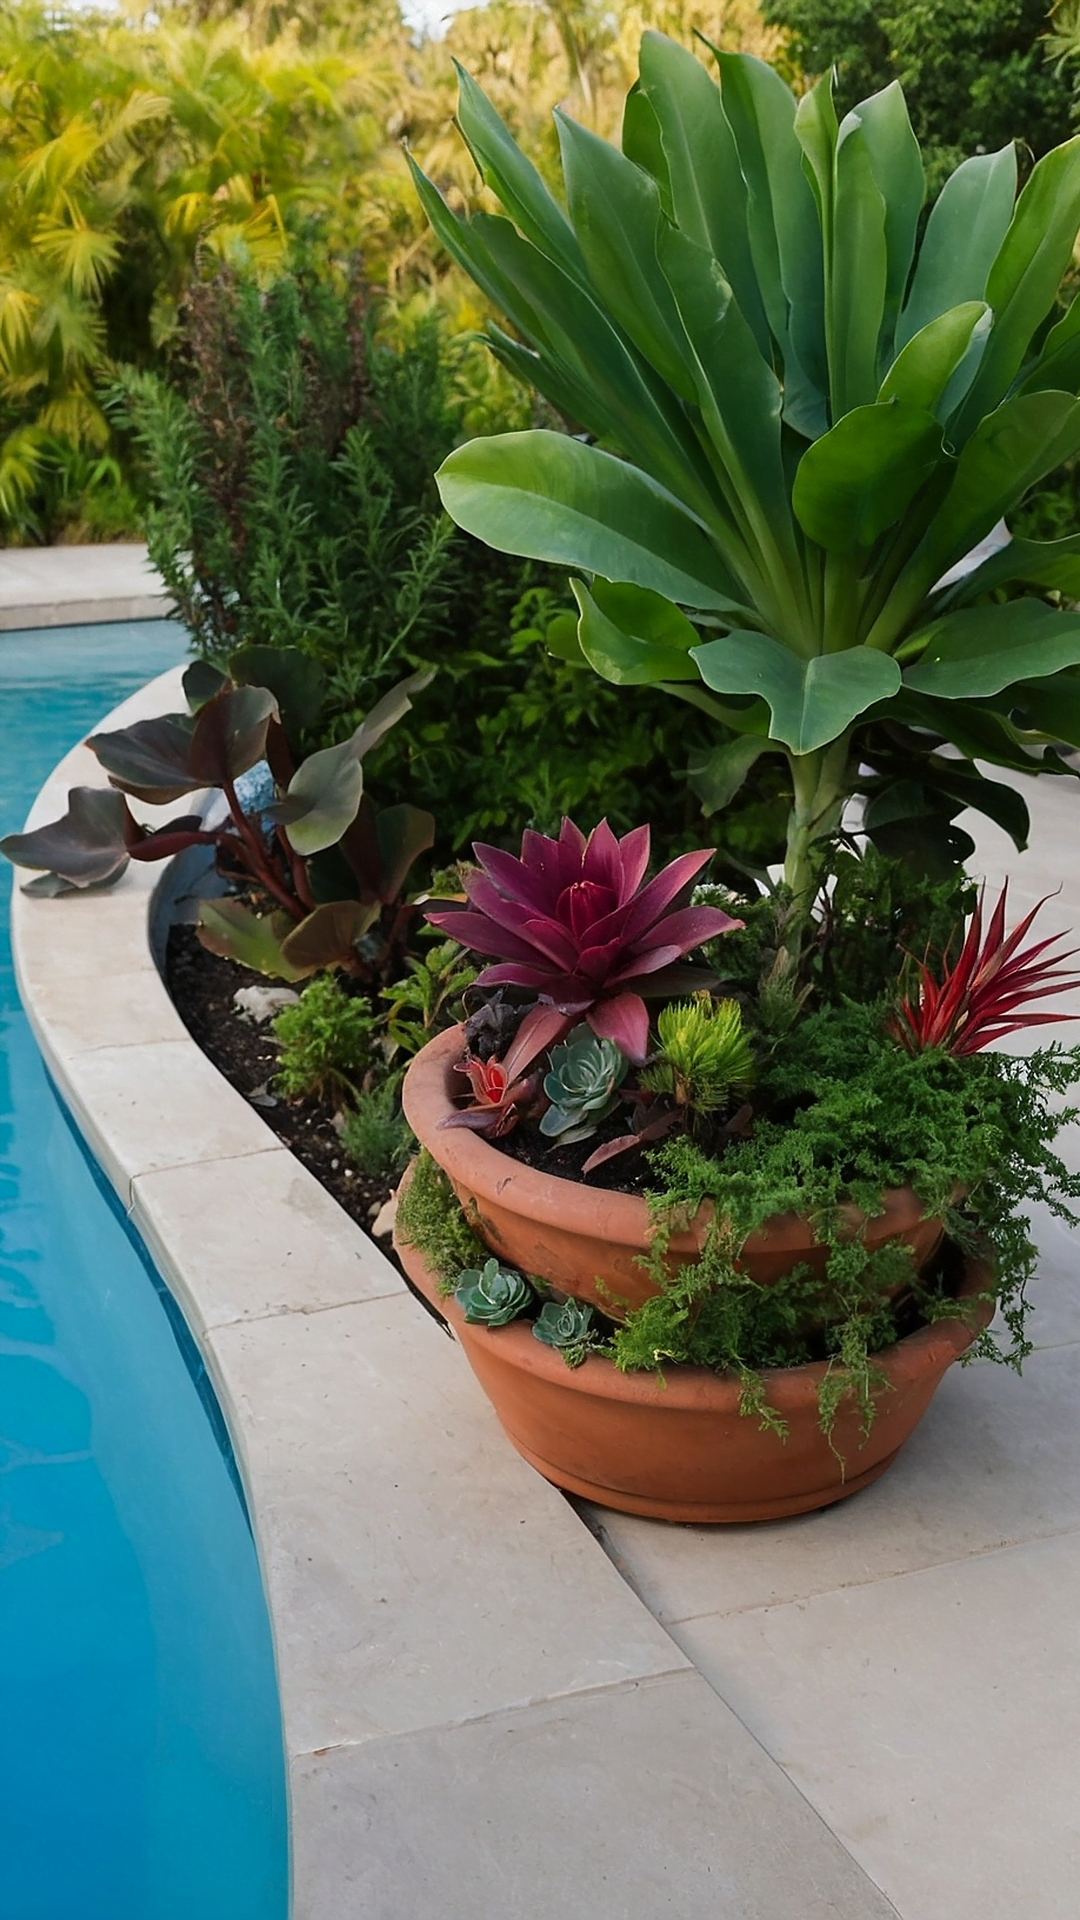 Unrivaled Poolside Plants that Thrive in Sunlight